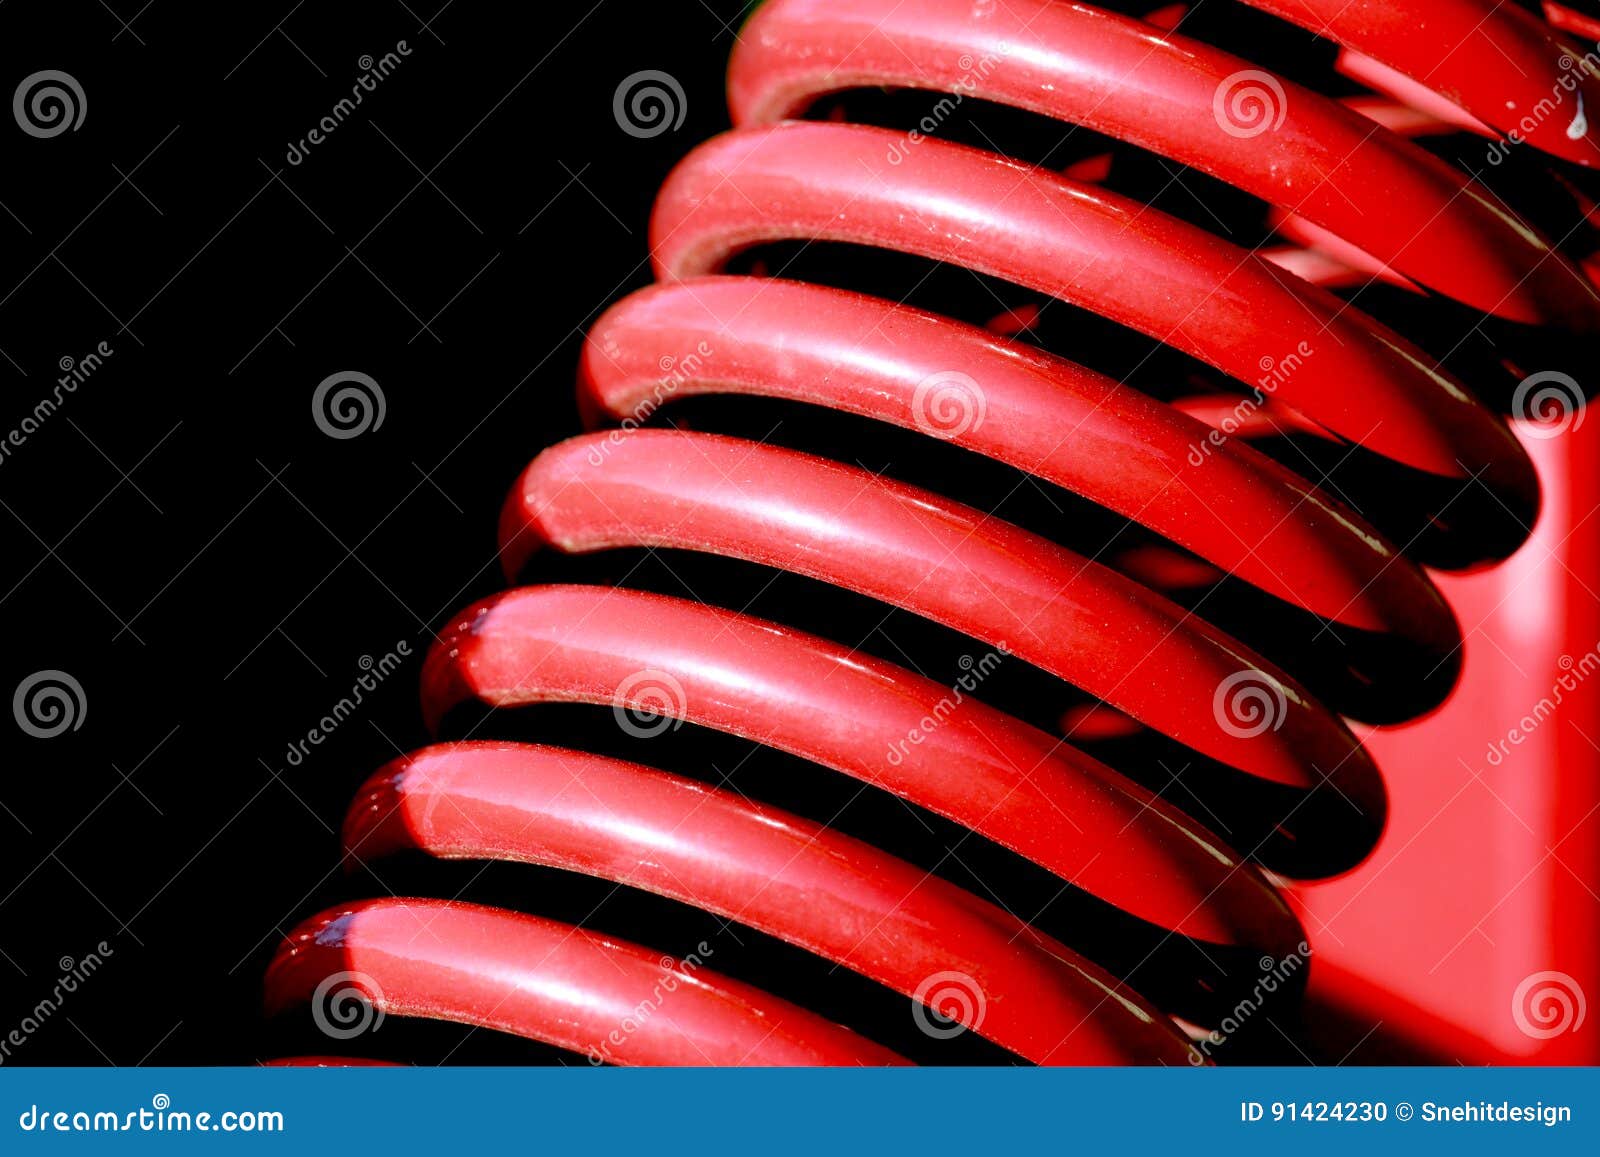 red helical spring